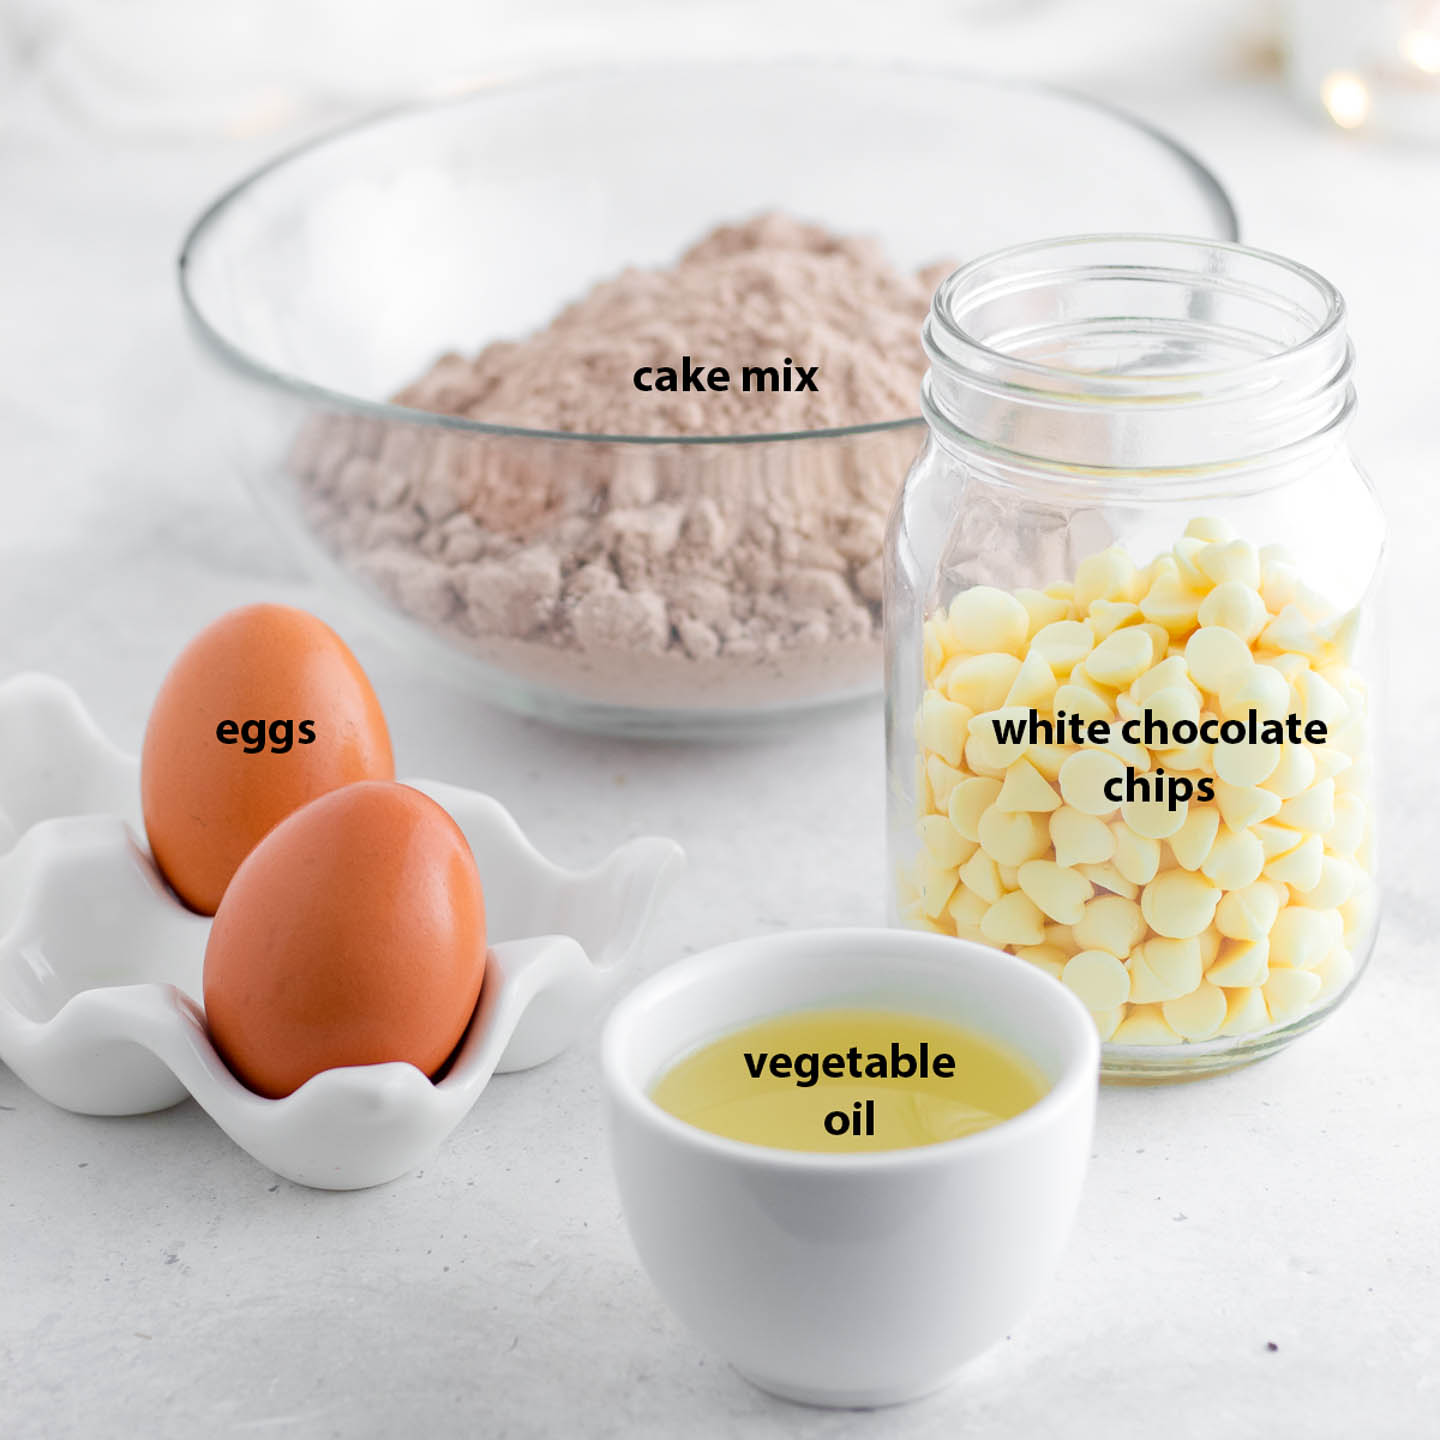 red velvet cake mix cookie ingredients - cake mix, eggs, vegetable oil, white chocolate chips